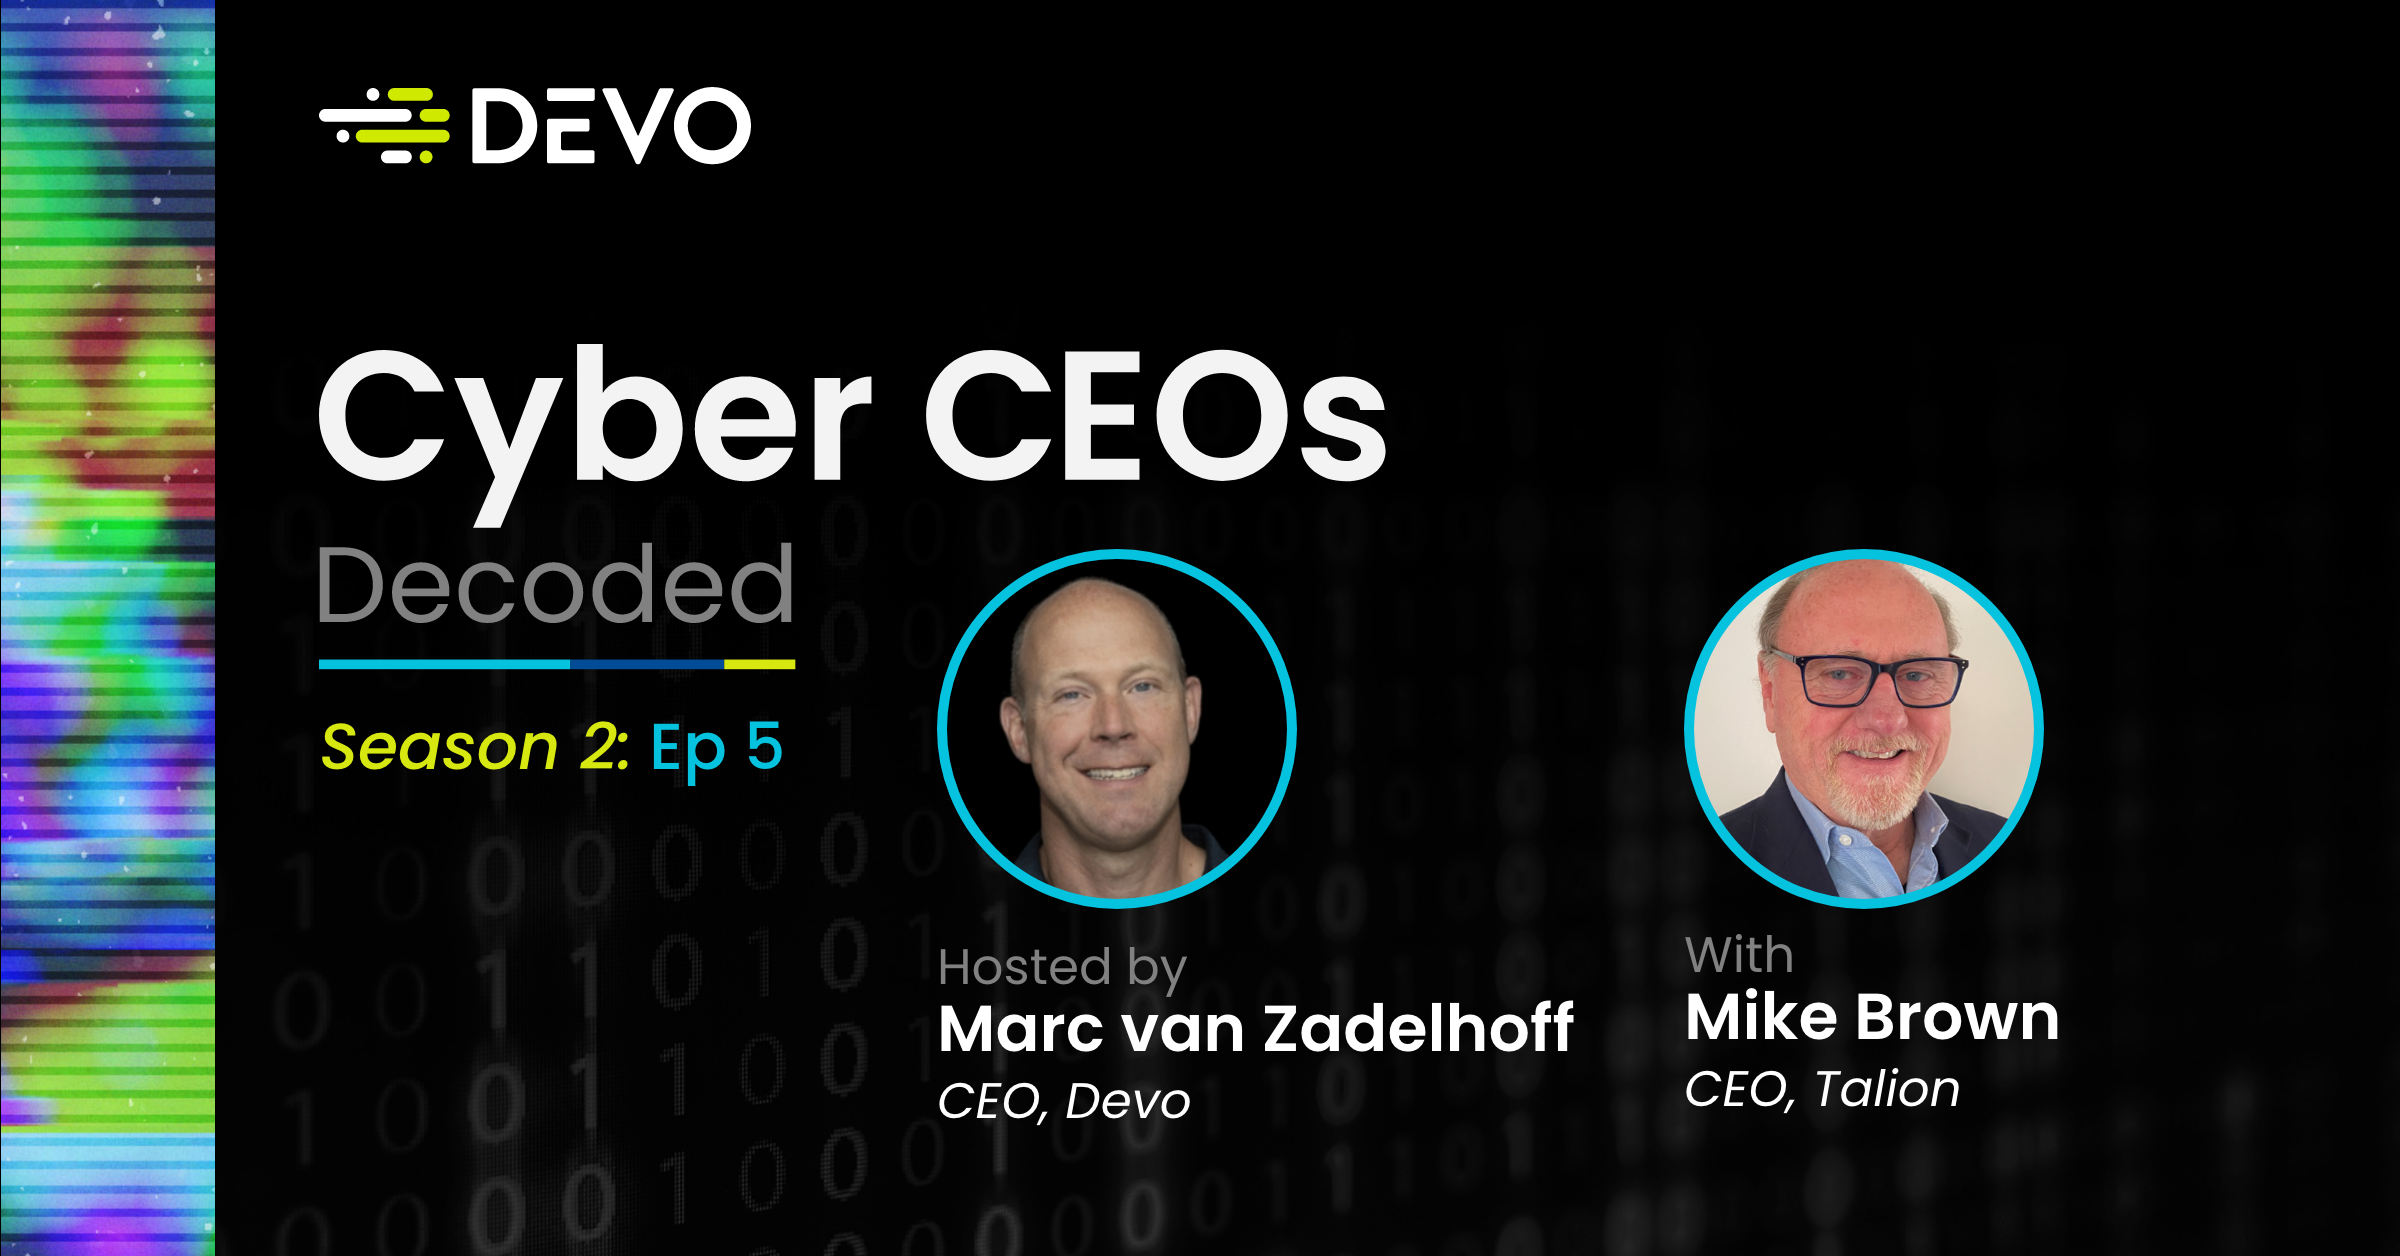 CyberCEOS Decoded Season 2 Episode 5 Mike Brown